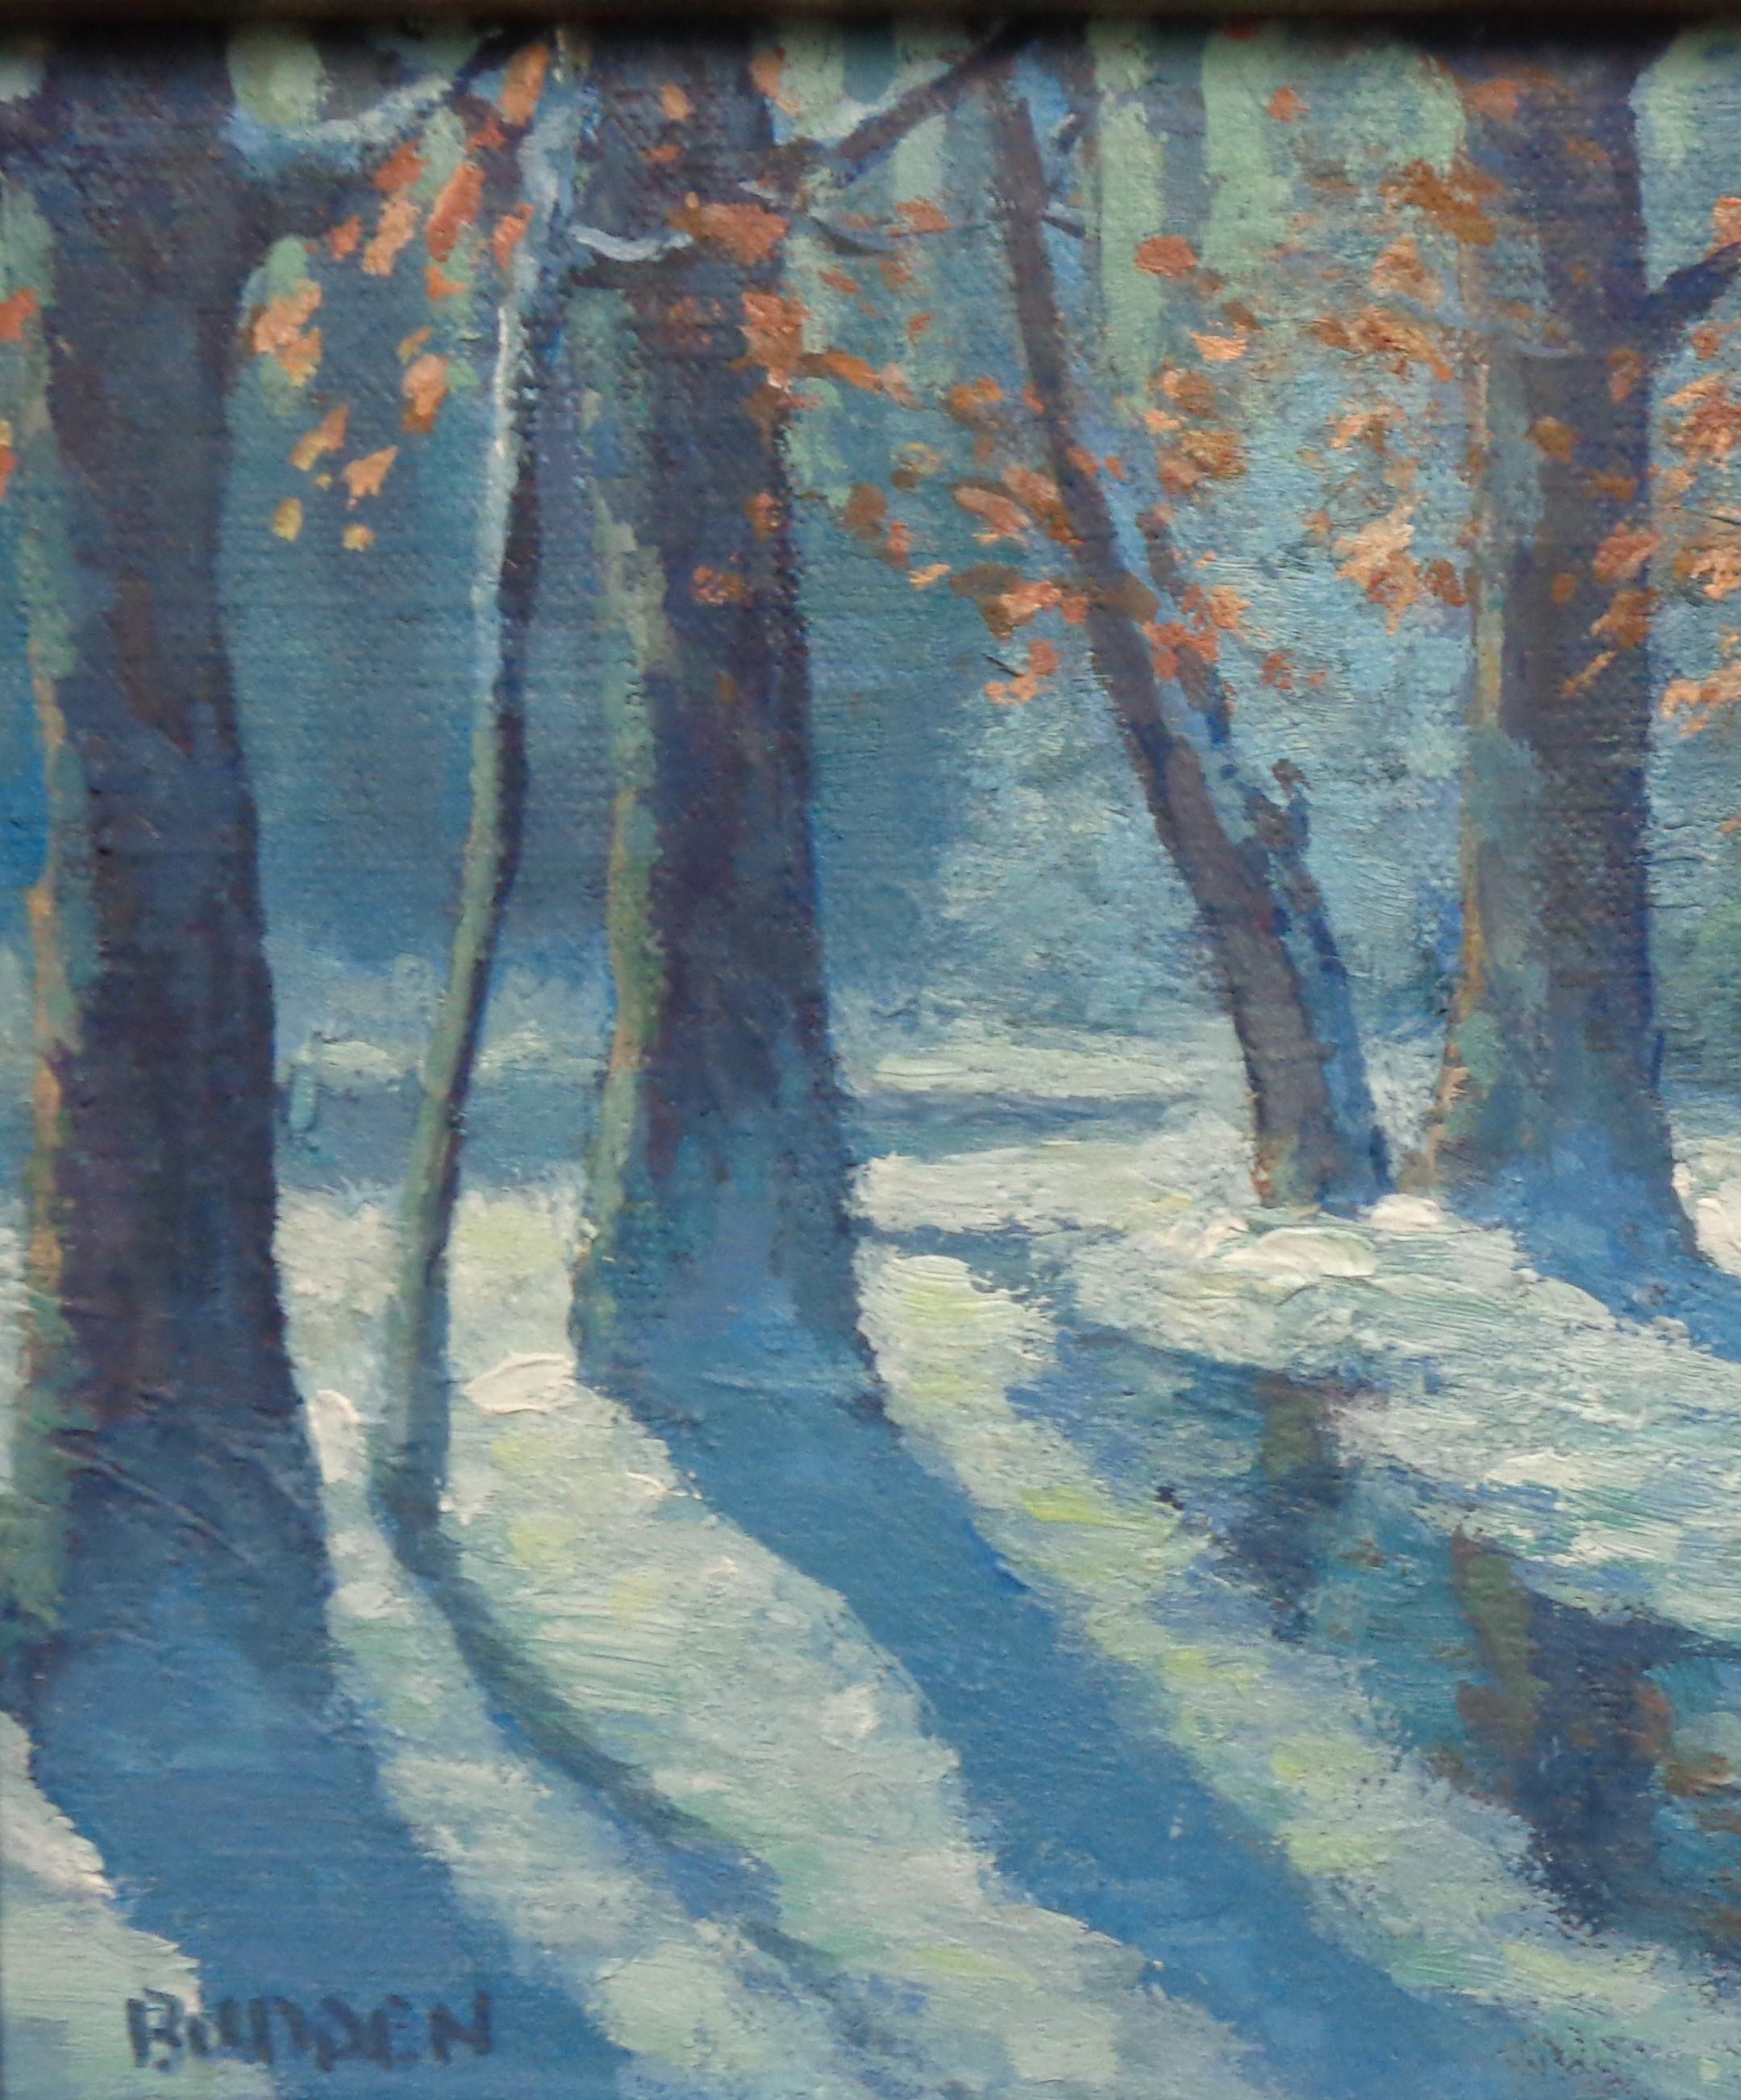  Impressionistic Winter Snow Landscape Oil Painting Michael Budden Winter Woods For Sale 2